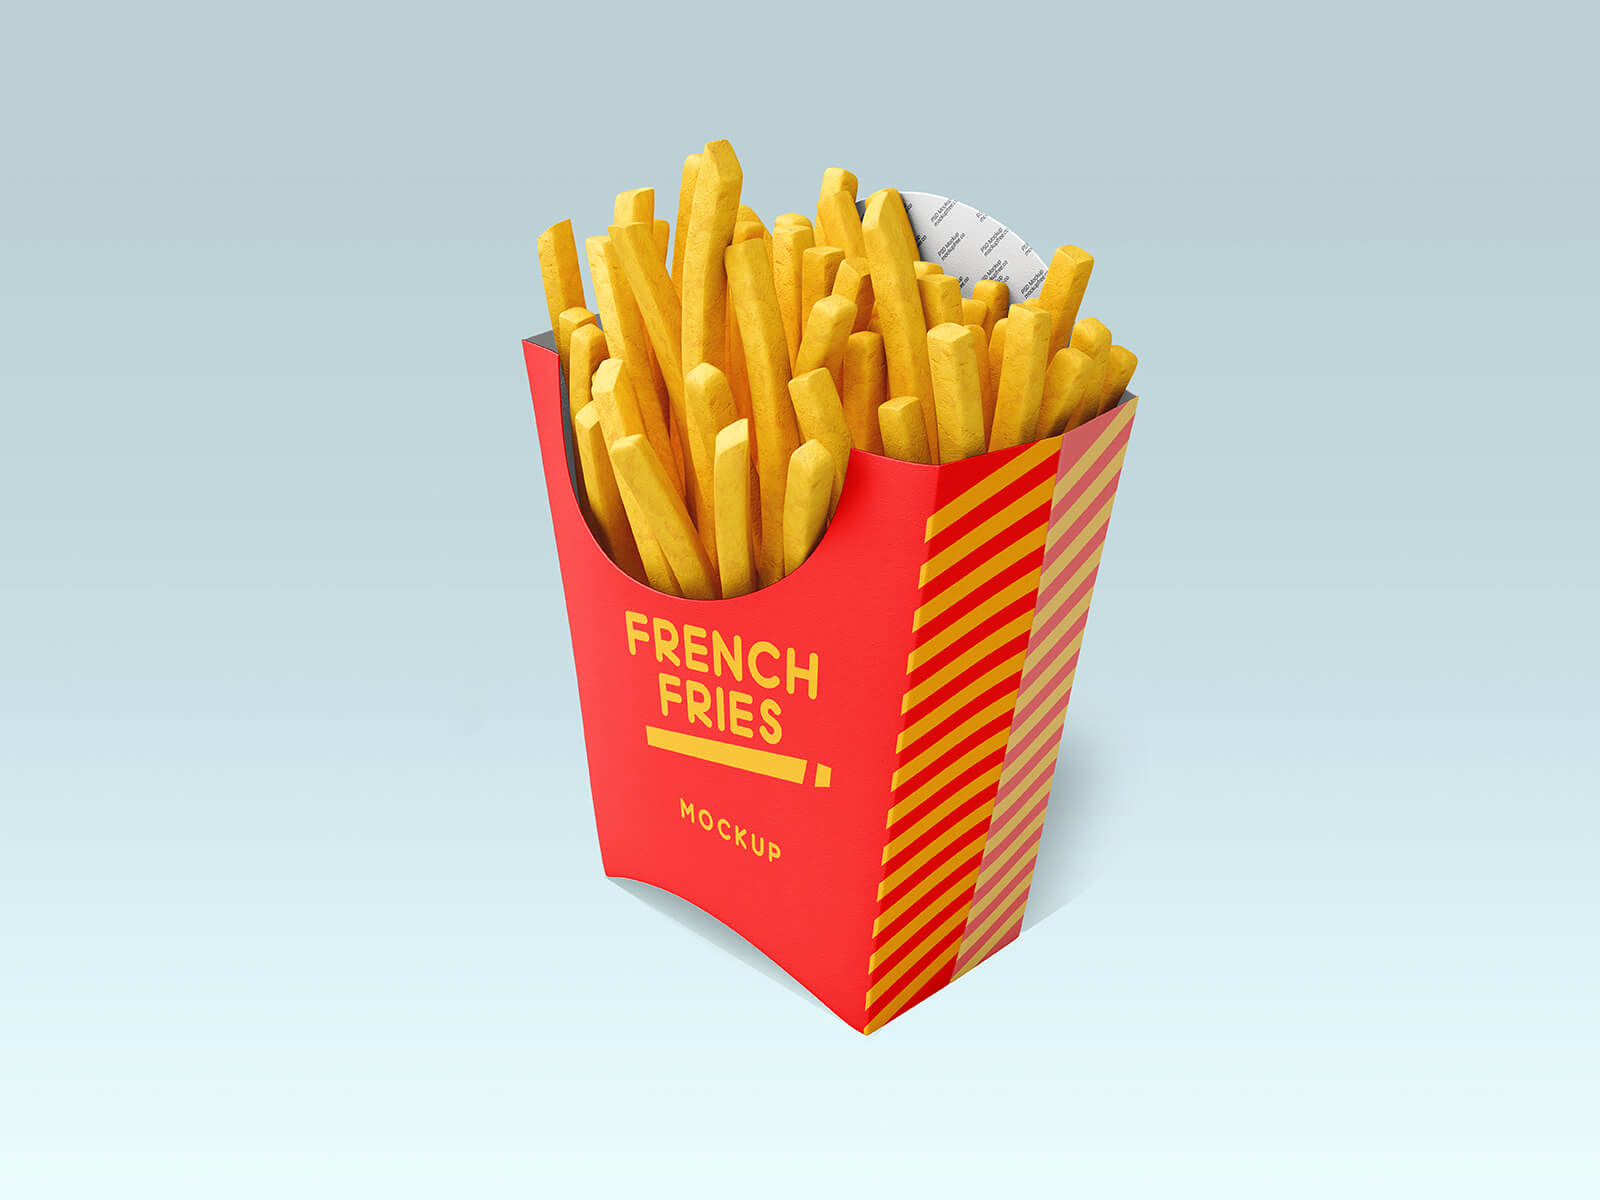 Free-French-Fries-Packaging-Mockup-PSD_03